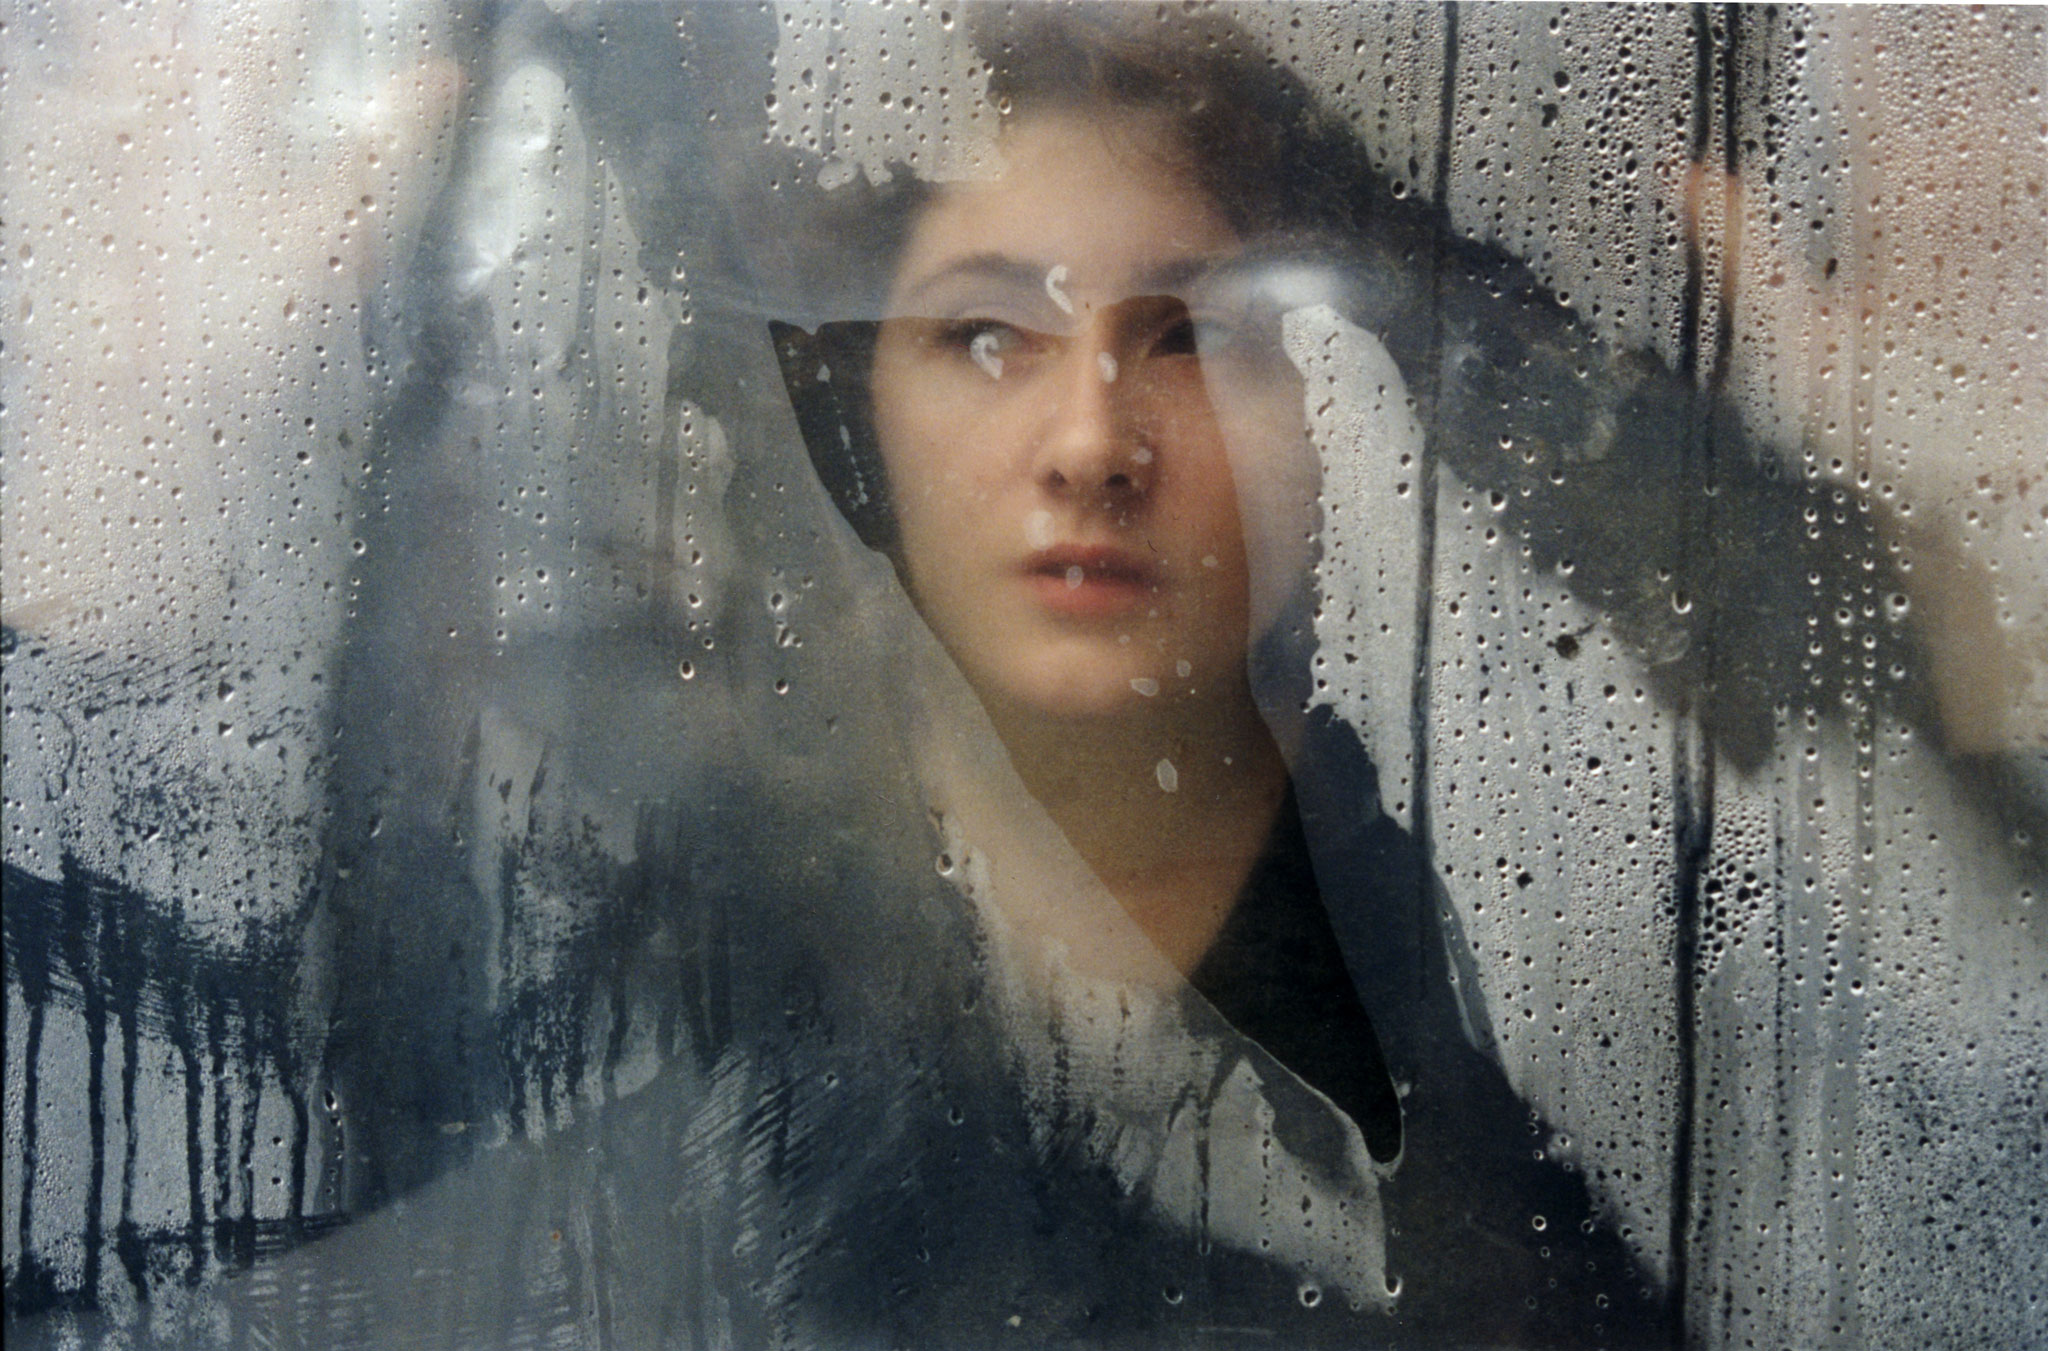 Chechnya, Grozny, young woman looking out of window